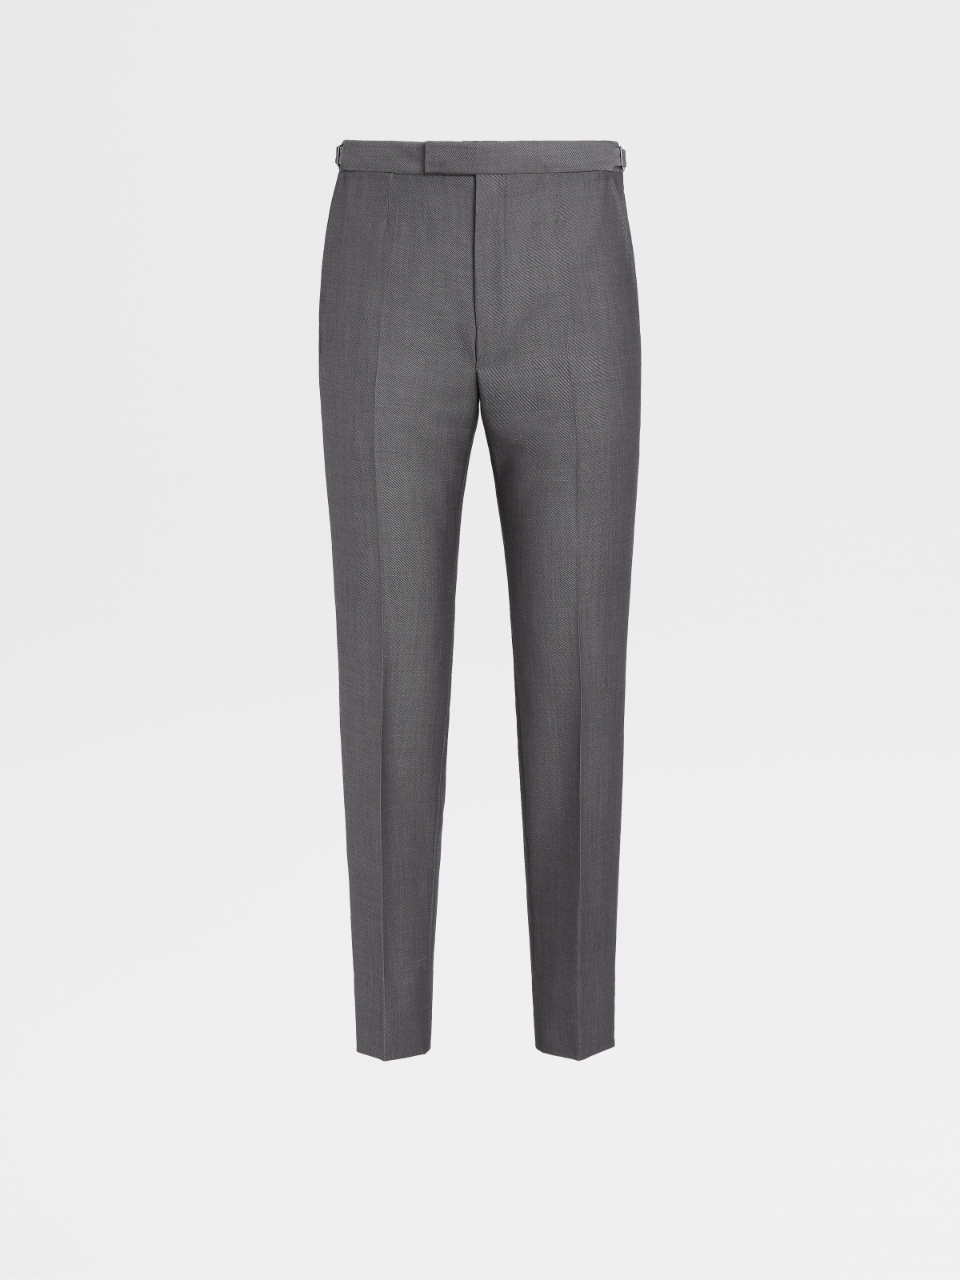 Achillfarm #UseTheExisting™ Wool and Mohair Flat Front Trousers